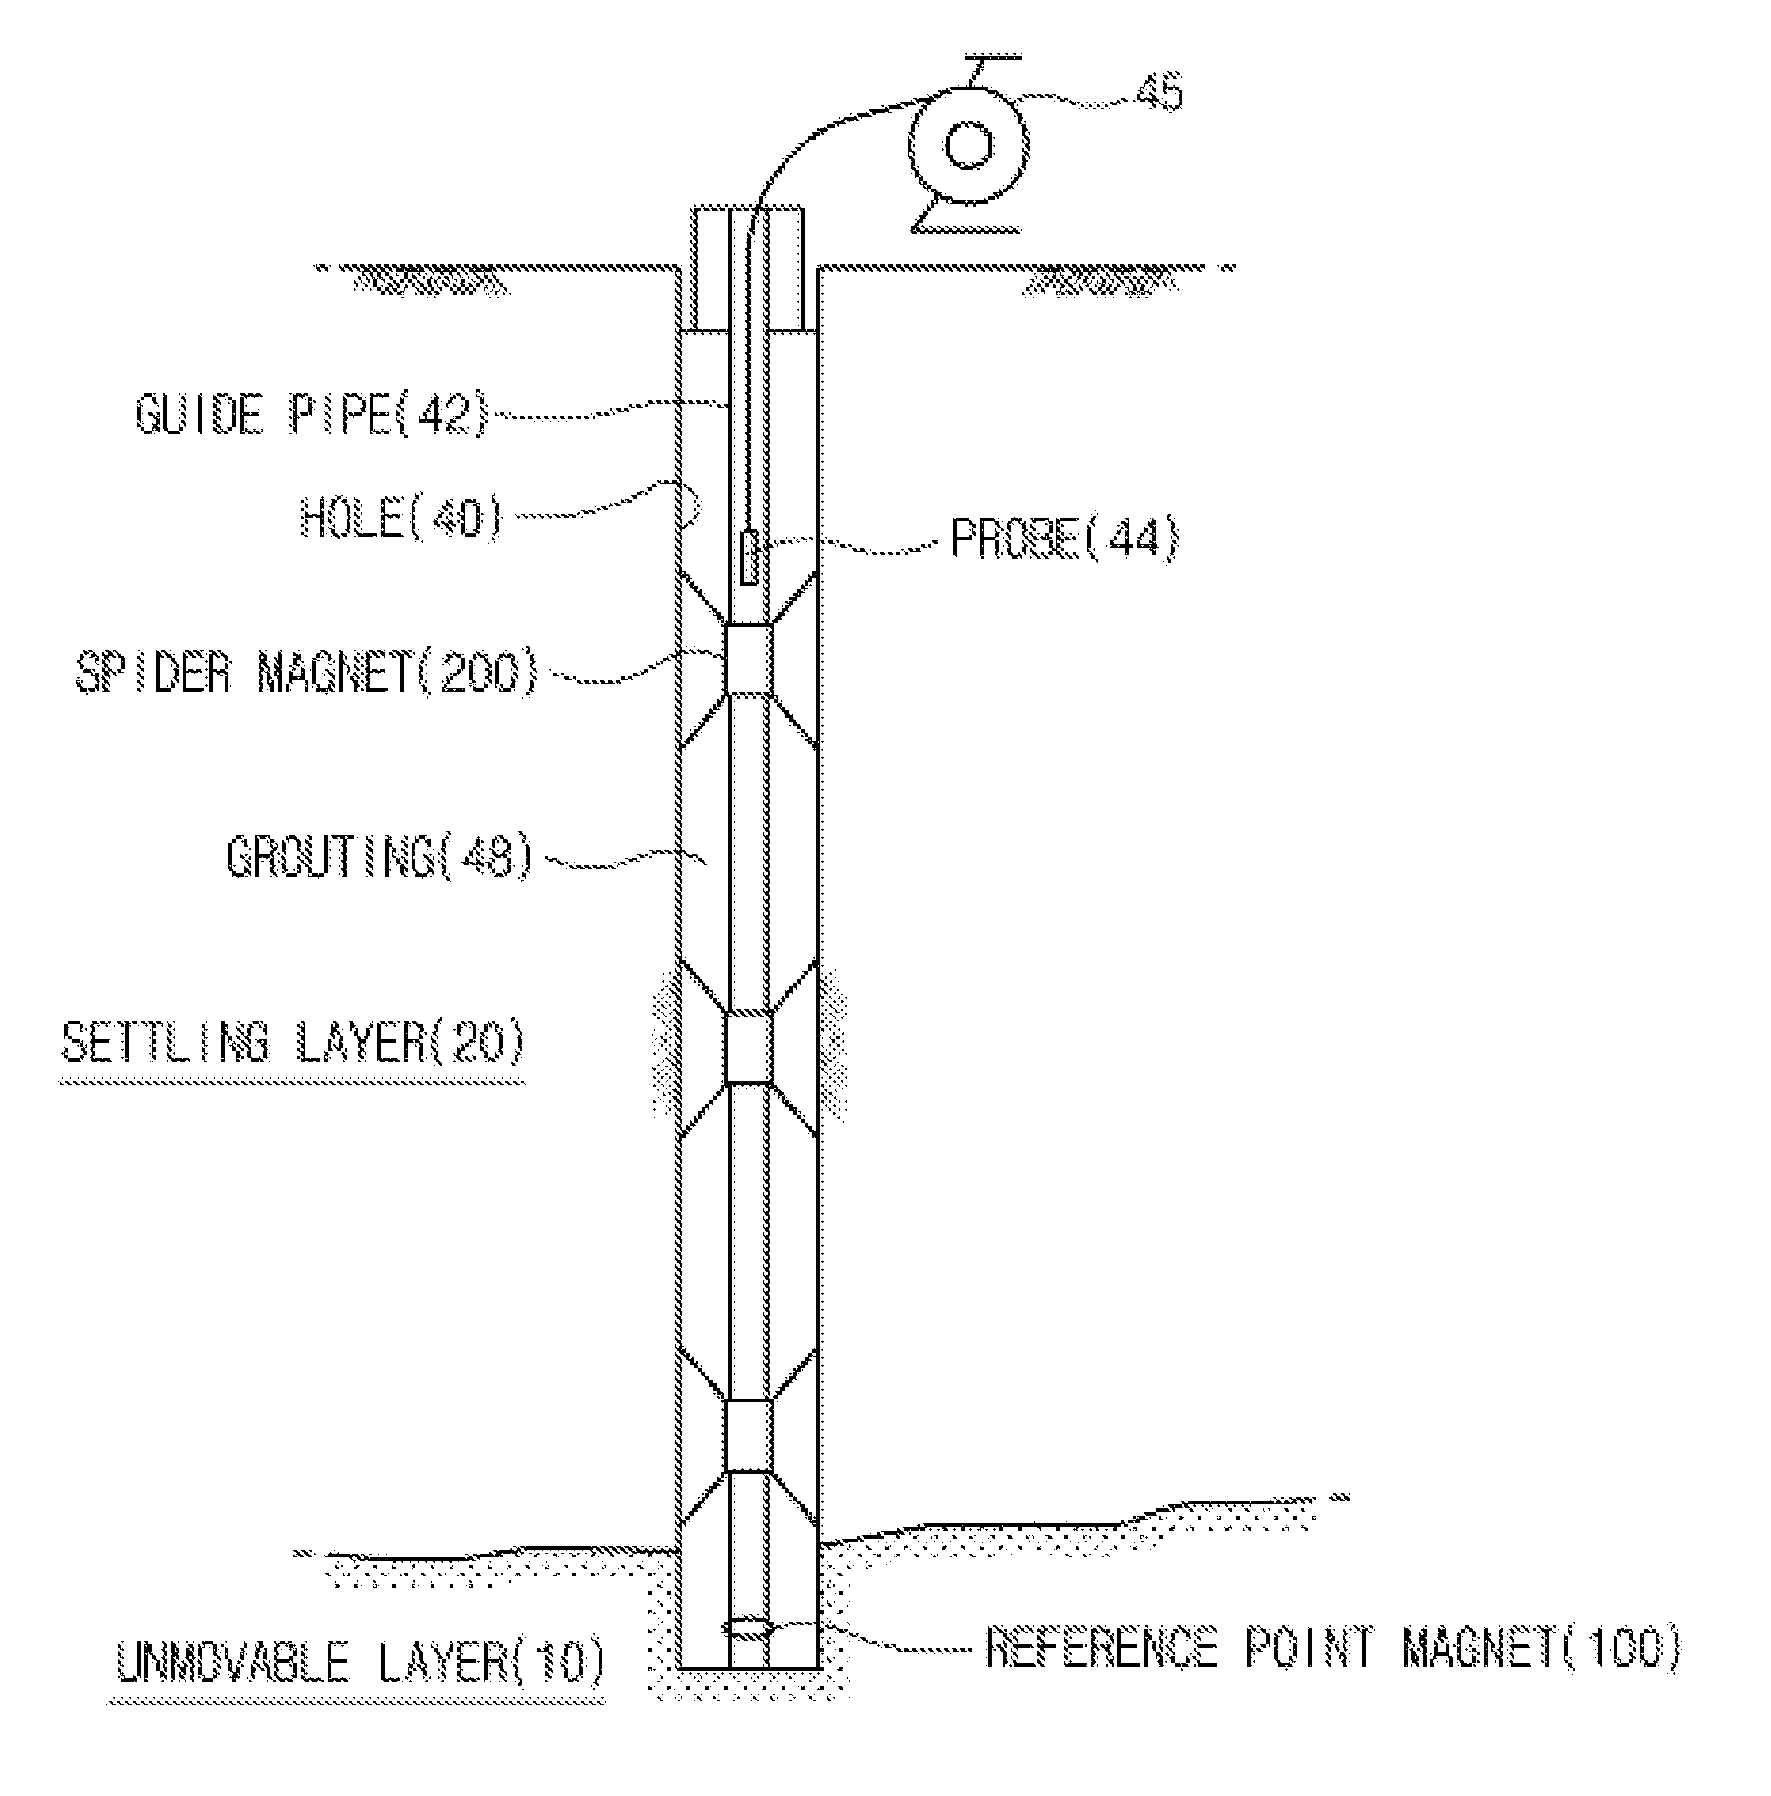 Land settlement measuring apparatus and system